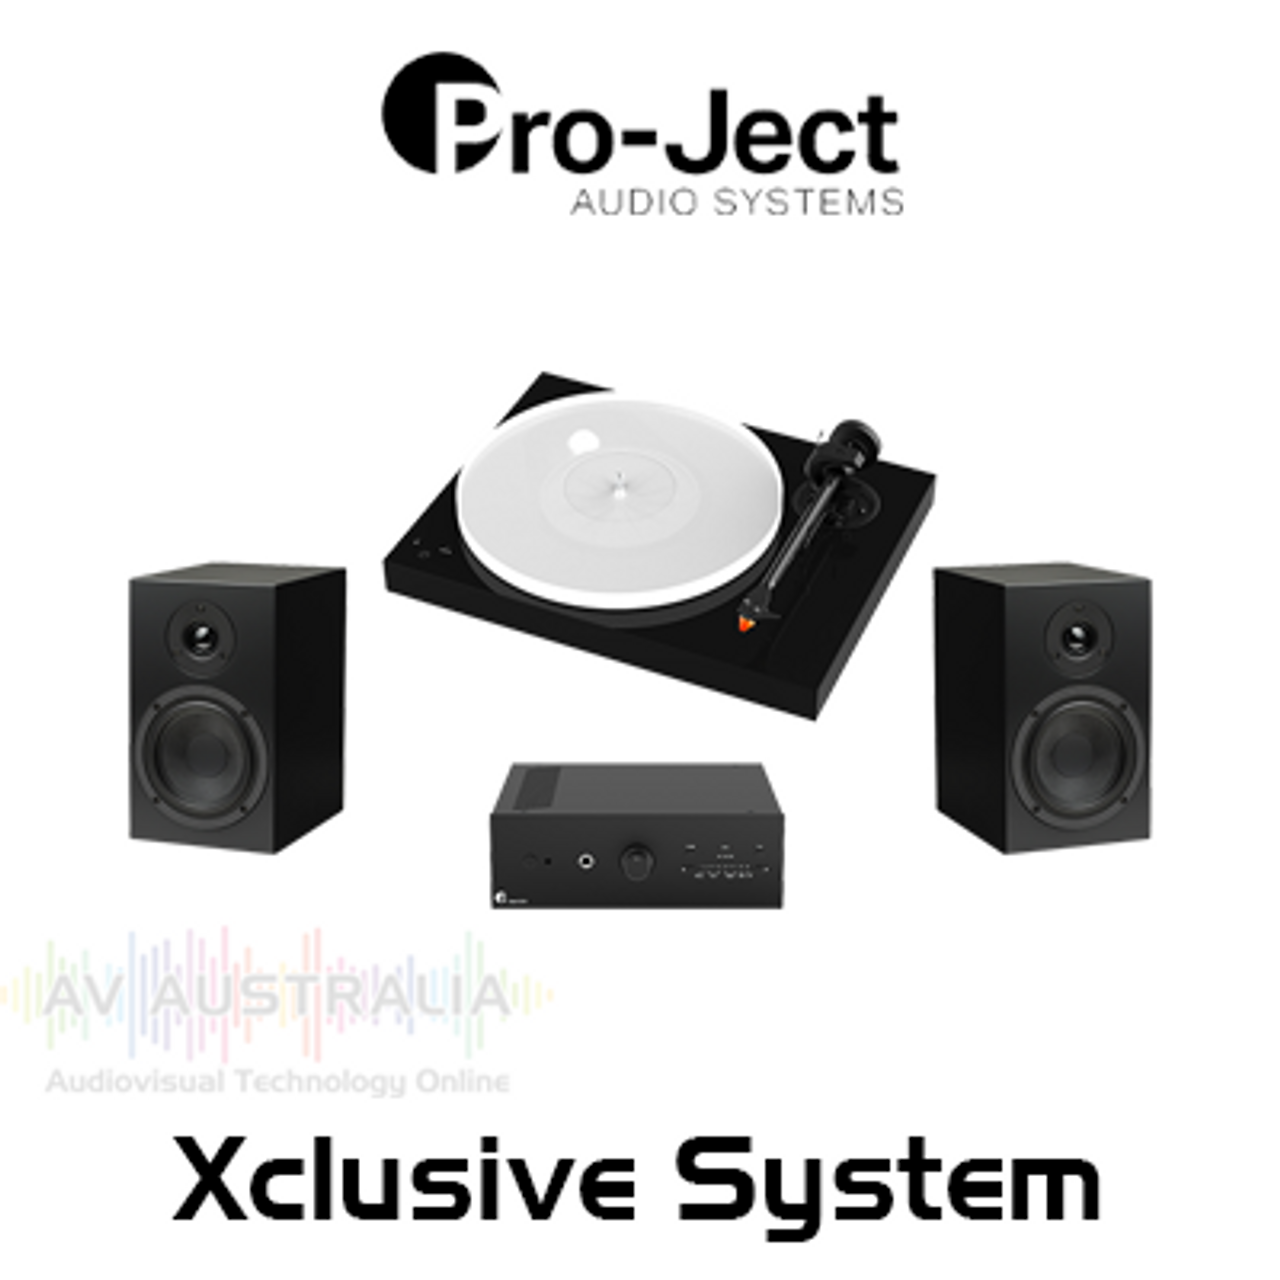 Pro-Ject Xclusive System